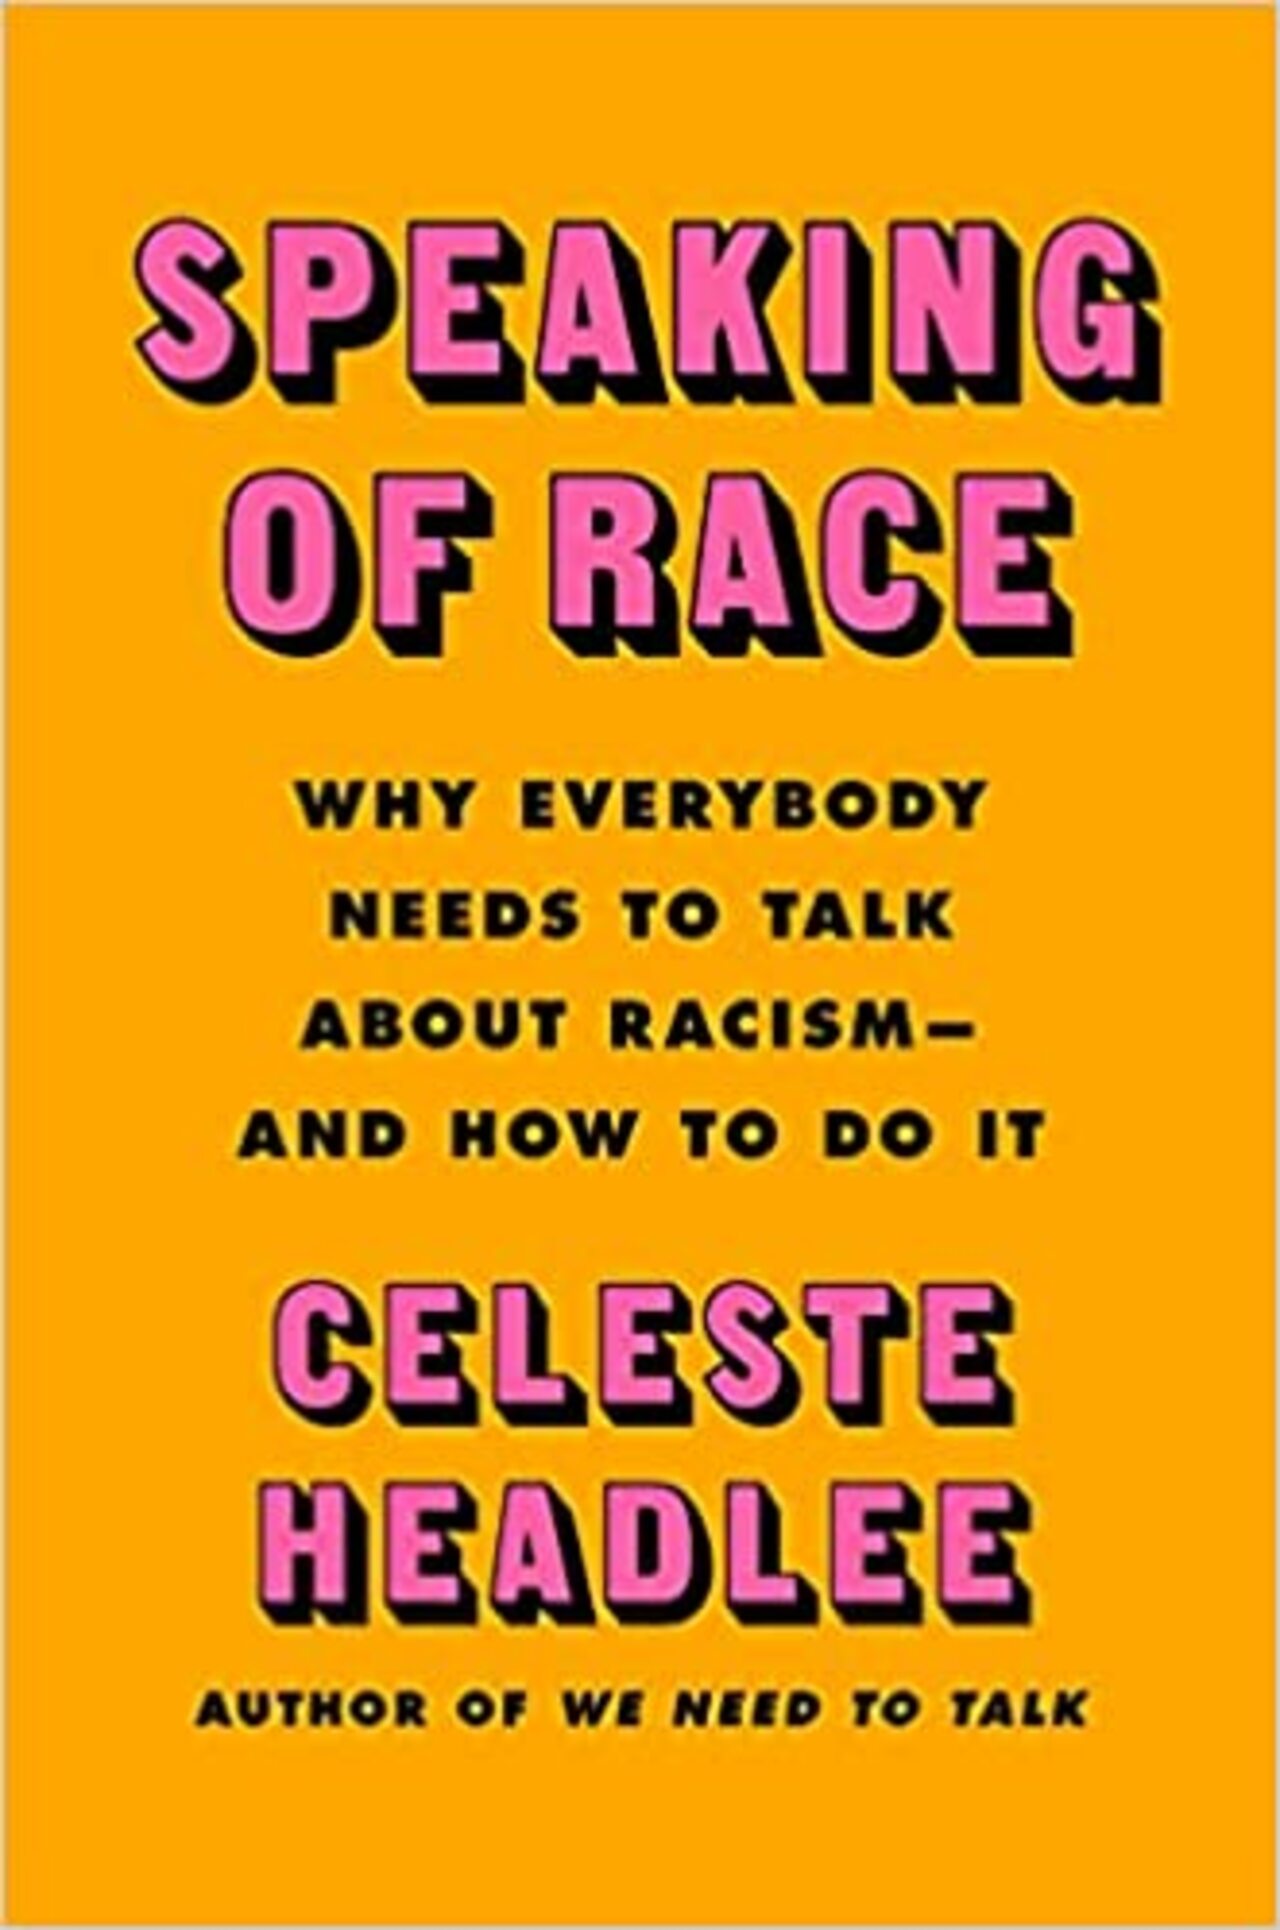 Critical Race Theory and the Banning of Black Authors